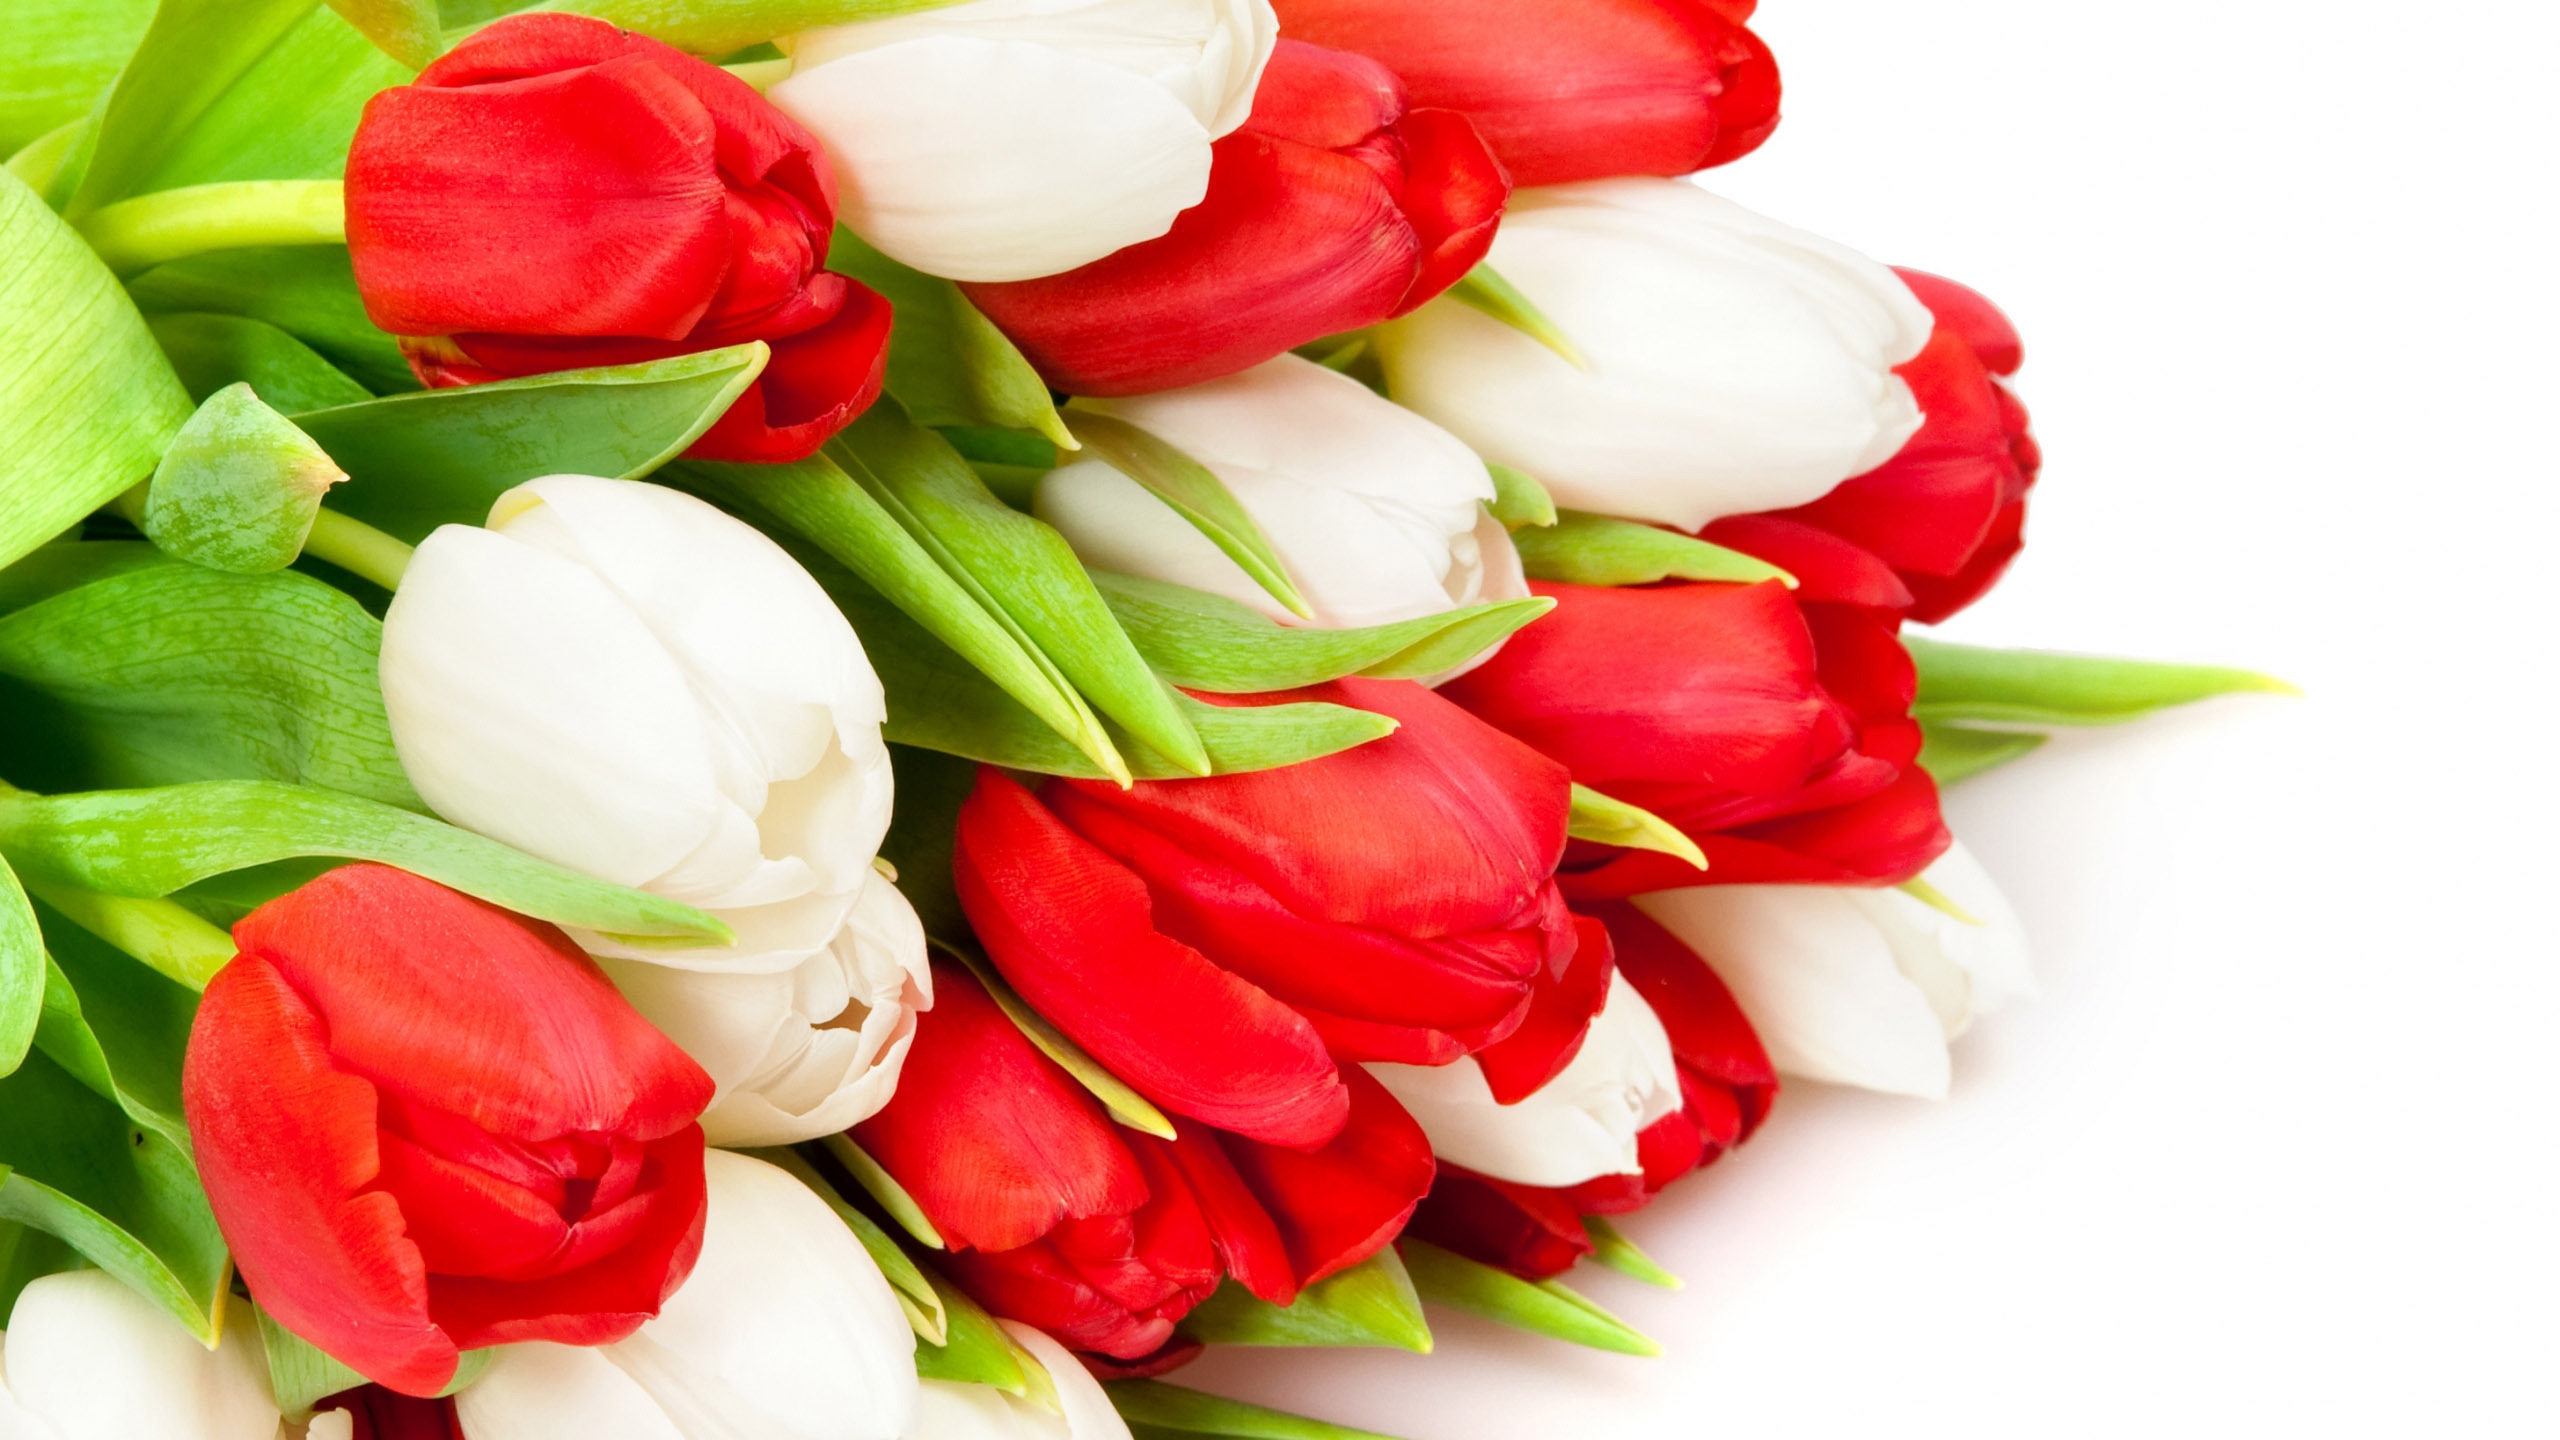 Red and White Tulips for 2560x1440 HDTV resolution